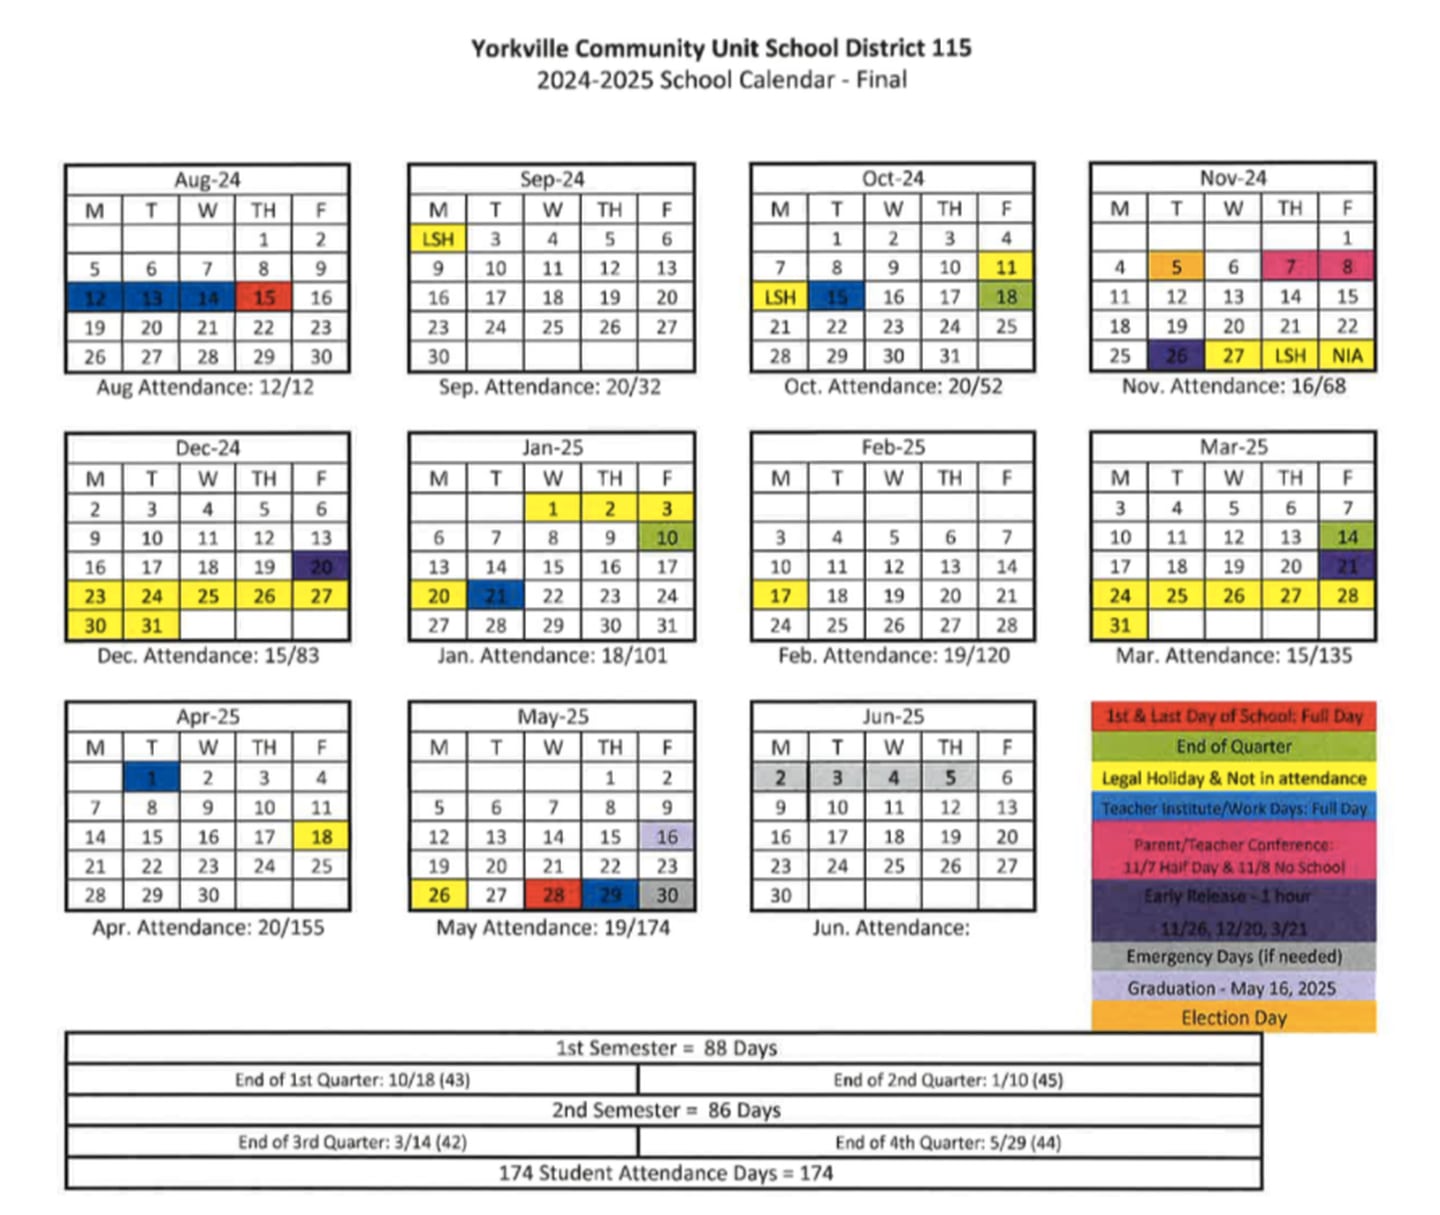 Yorkville School District 115 board members approved the calendar for their 2024-25 school year at a meeting on Nov. 27, 2023.